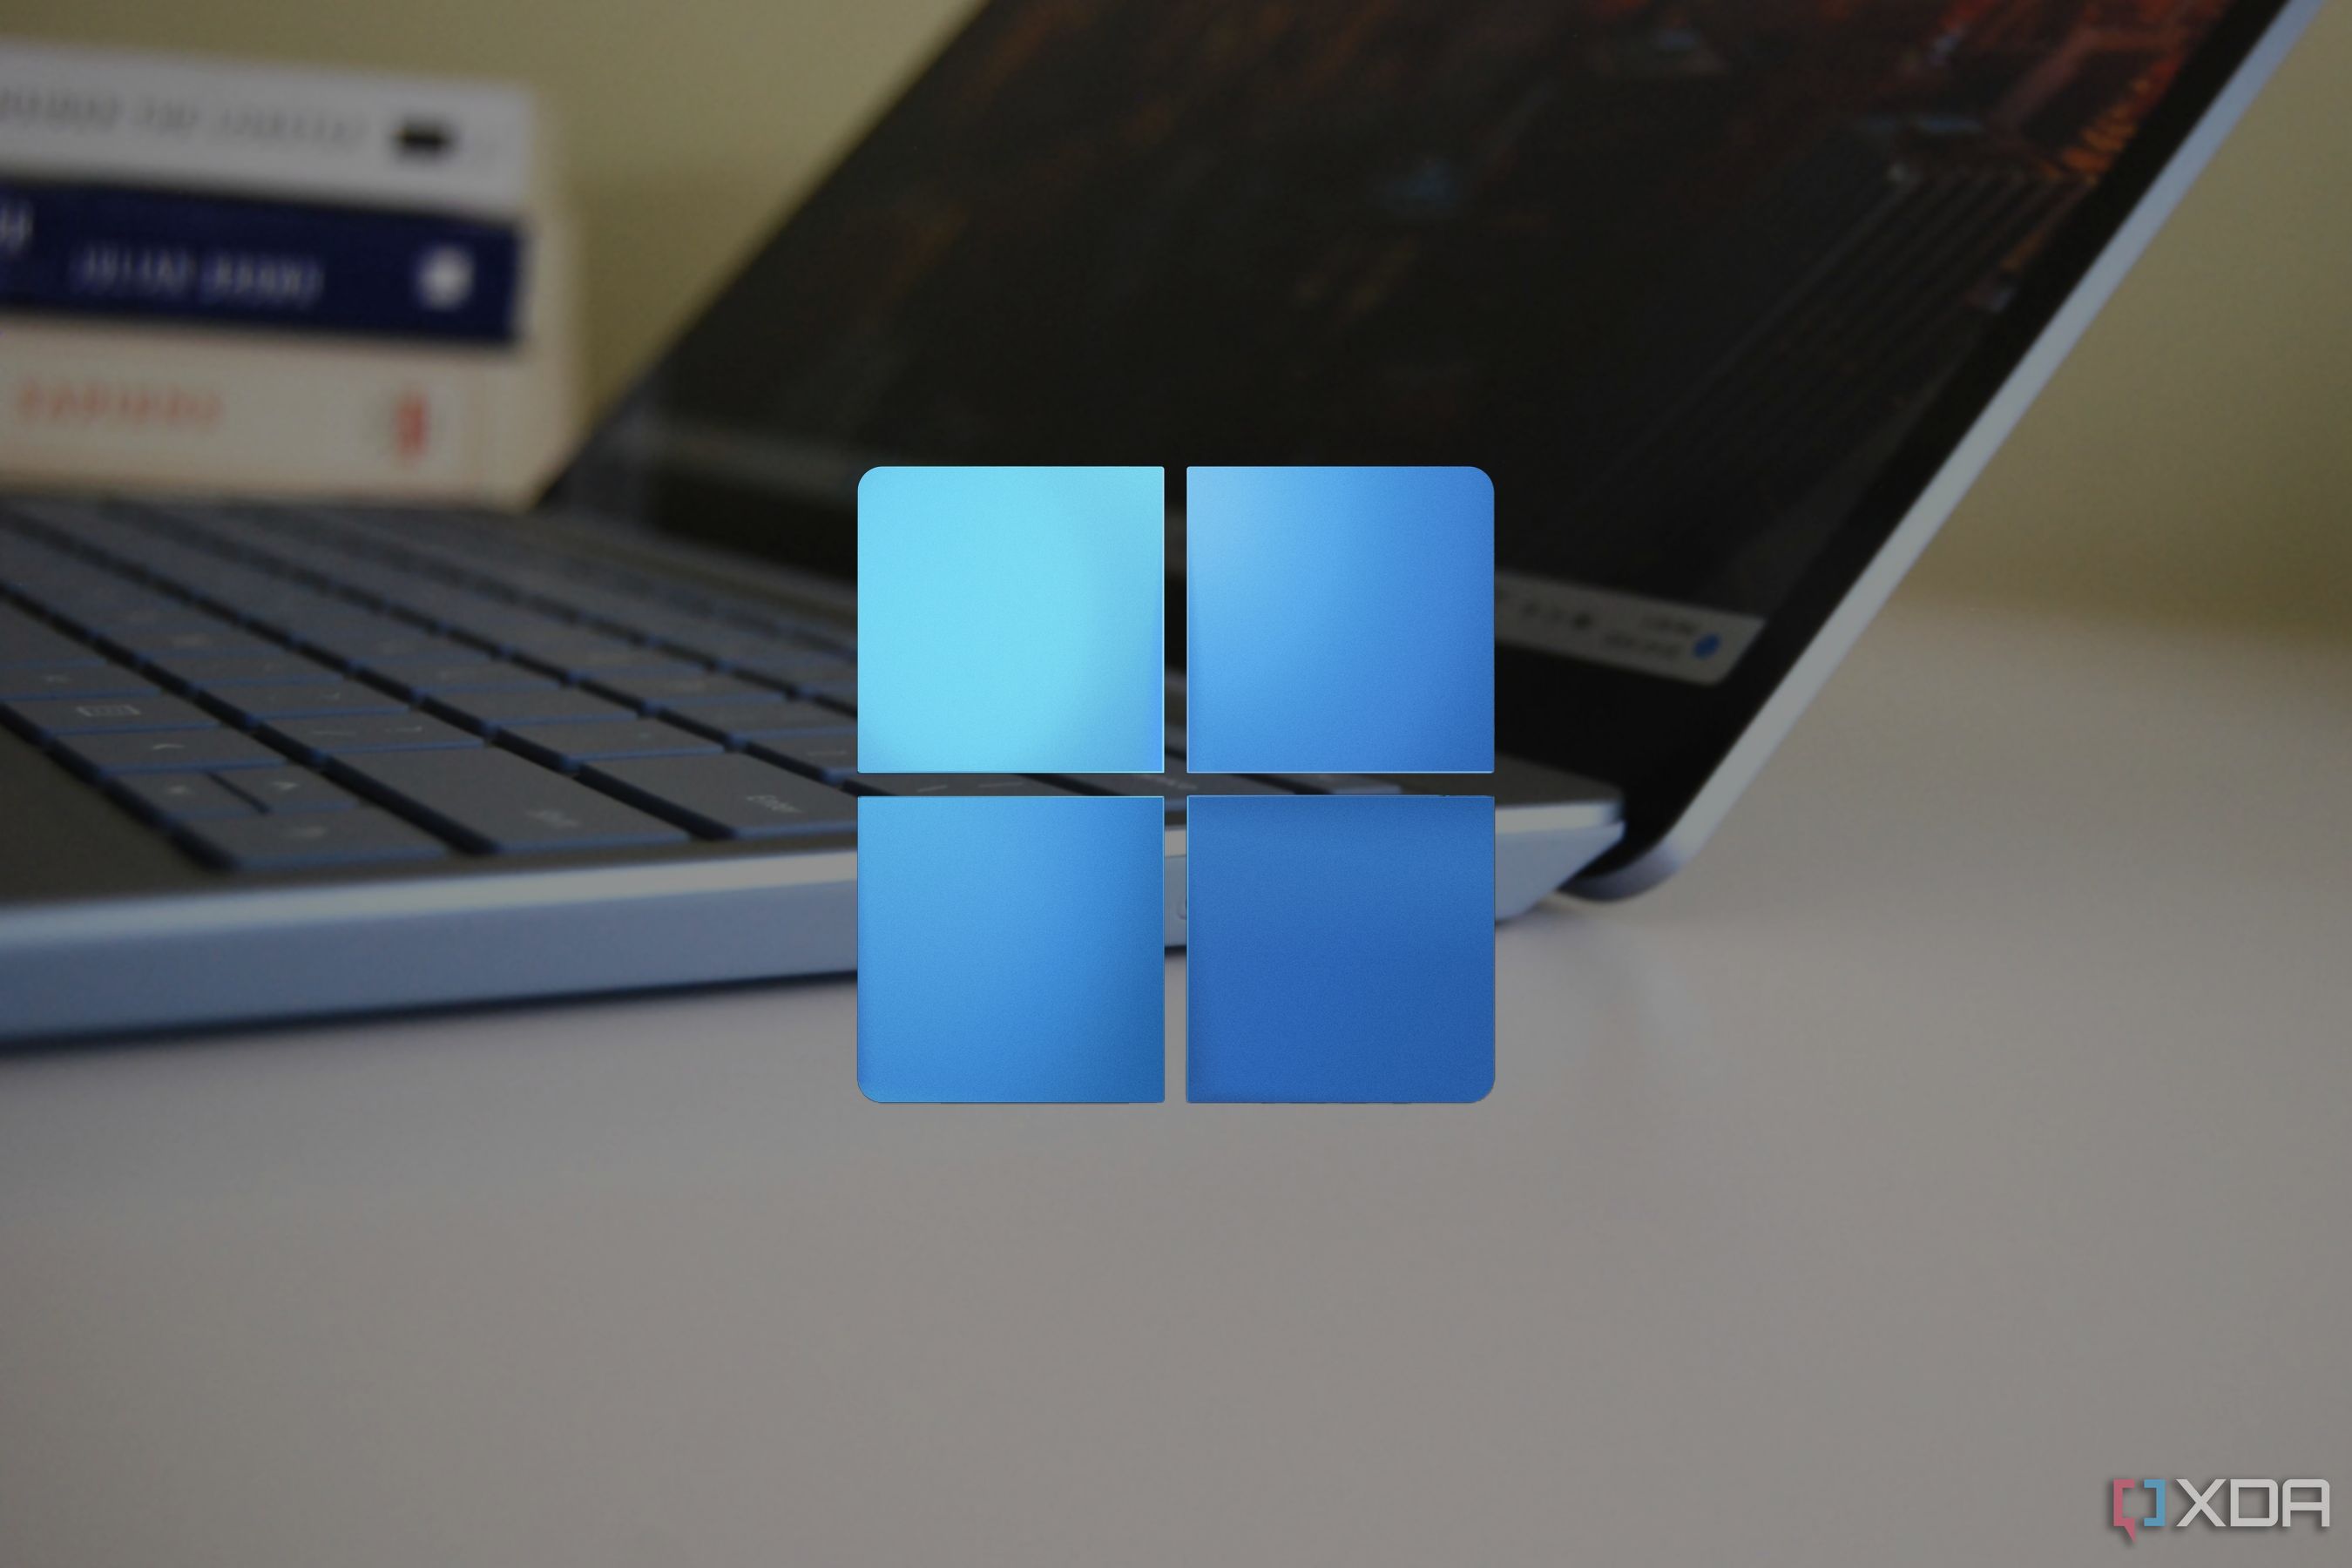 Windows 11's File Explorer is getting a revamp